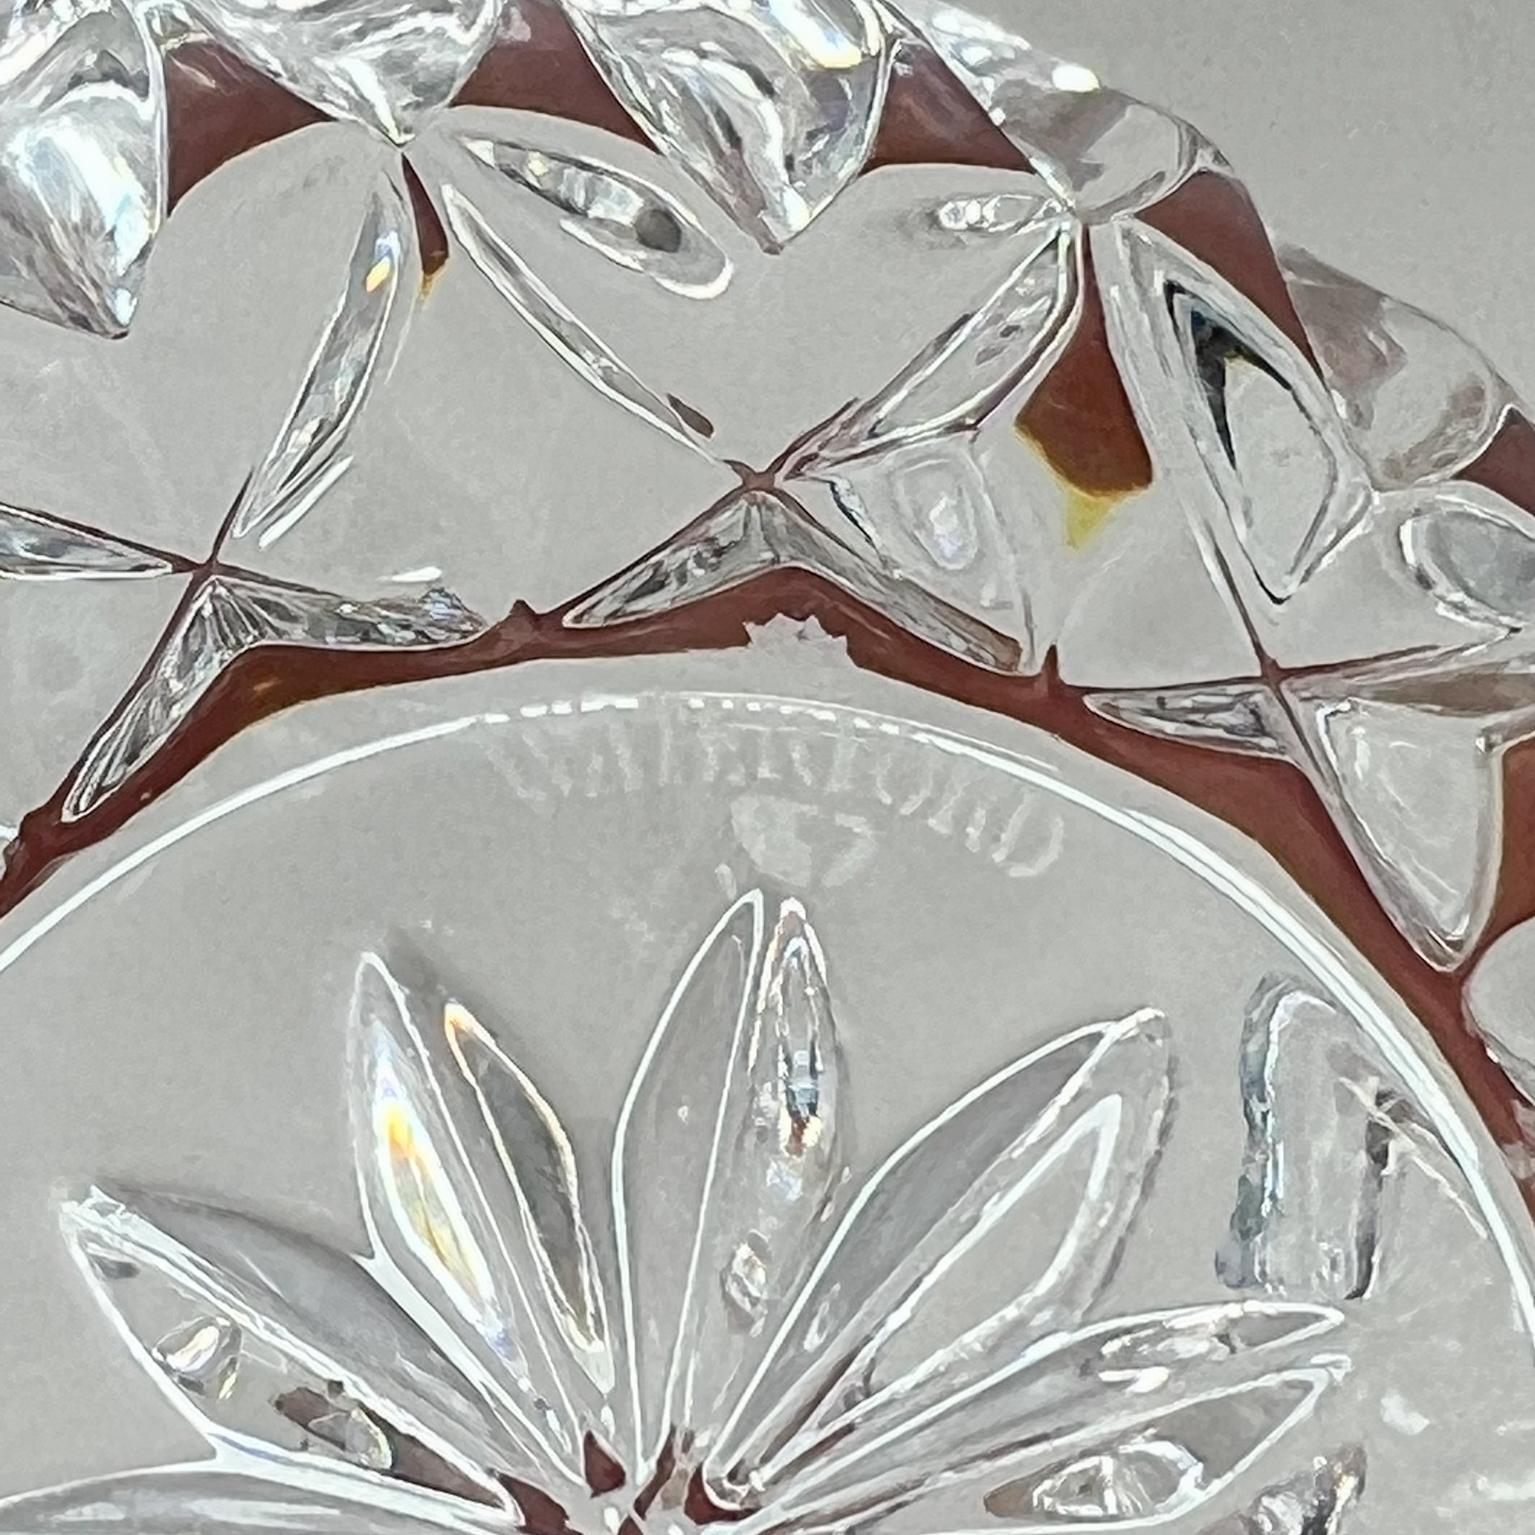 Late 20th Century Elegant Crystal Glass Votive Tealight Candle Holder by Waterford Ireland